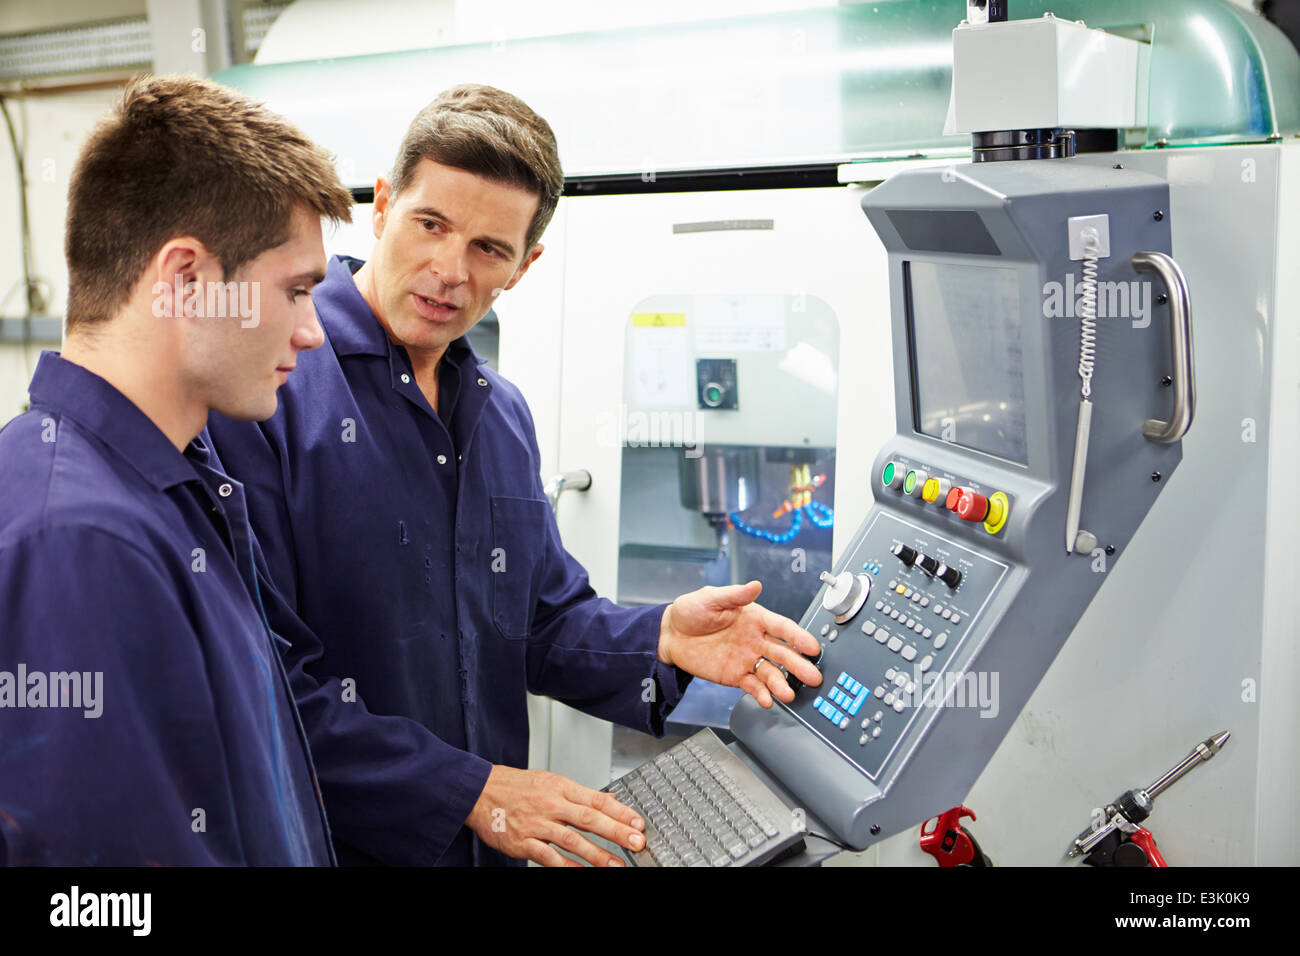 Engineer And Apprentice Using Automated Milling Machine Stock Photo